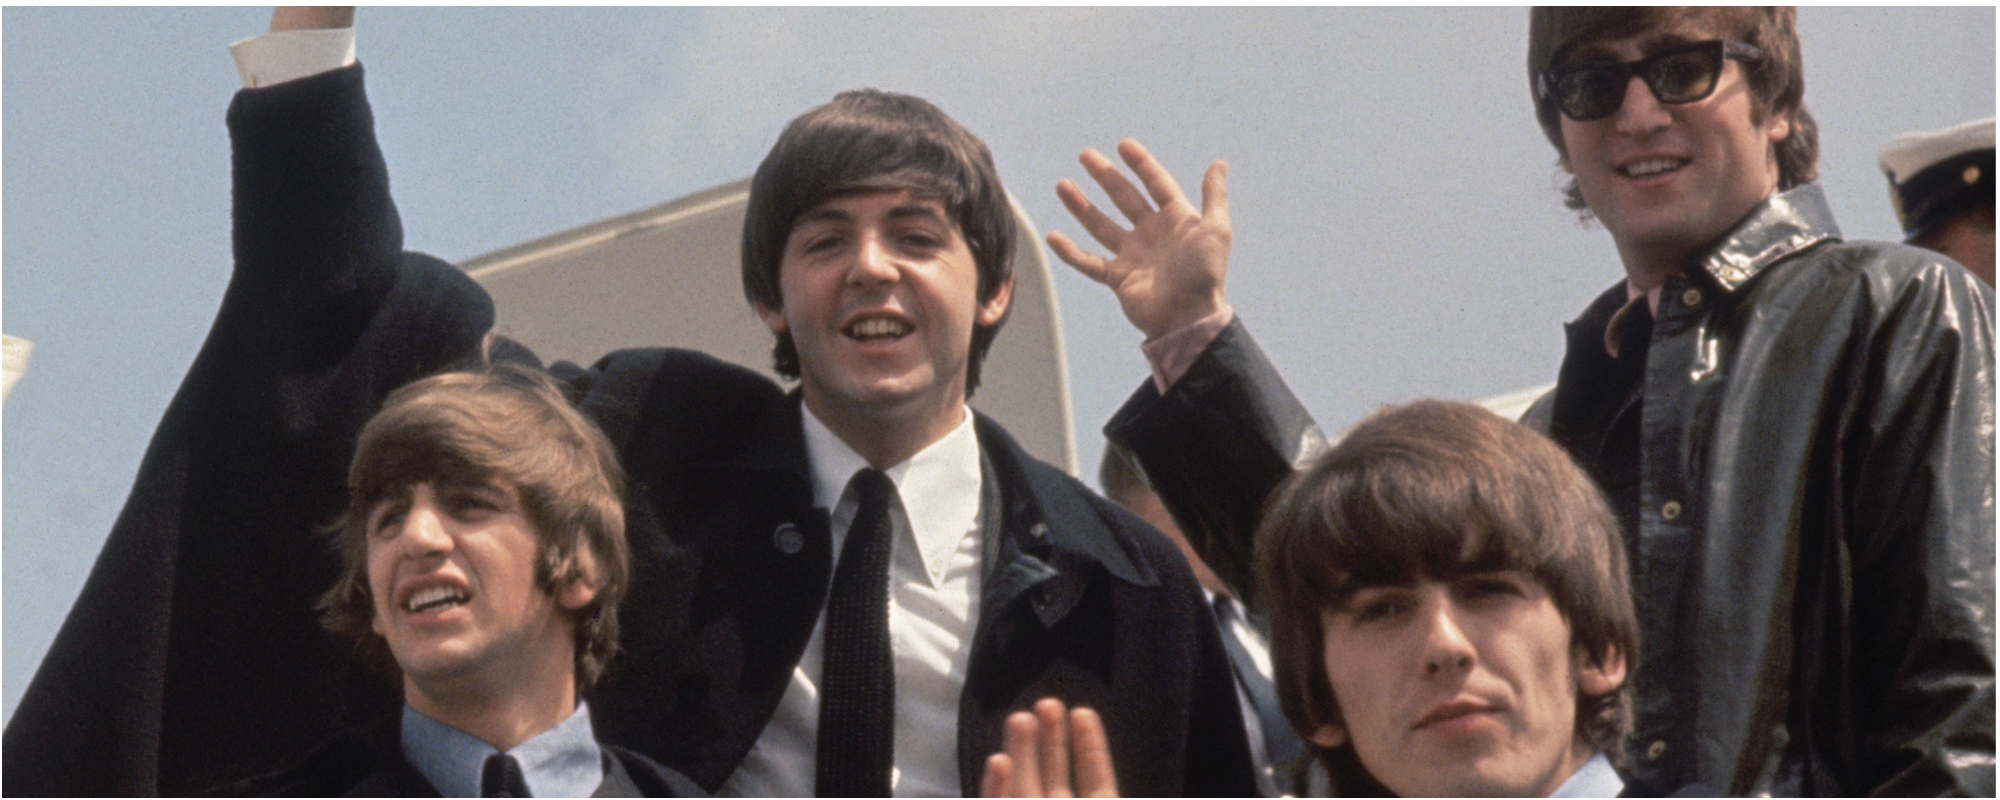 Report: “Now and Then” on Track to Become Beatles’ First No. 1 U.K. Hit in 54 Years